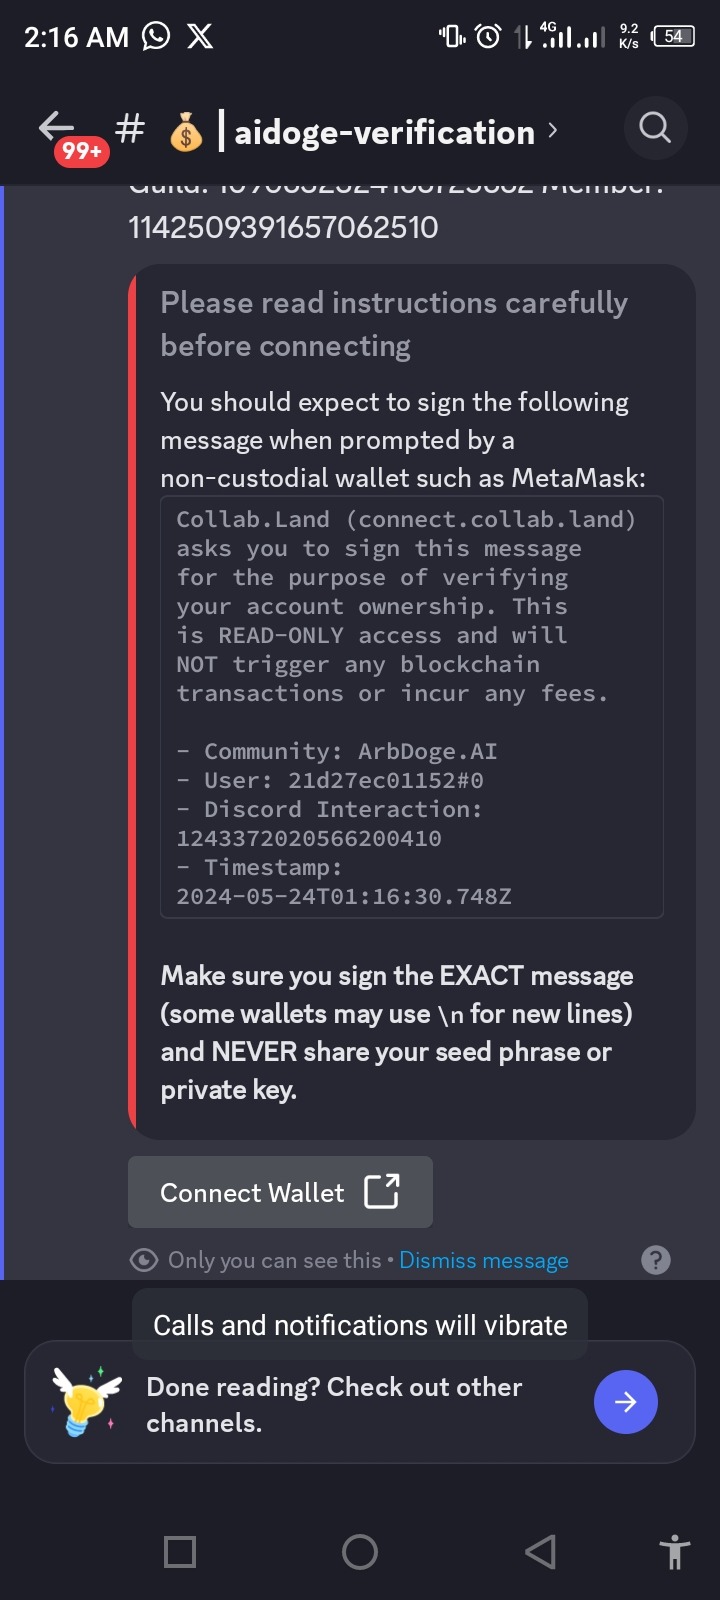 Wallet connection requirement